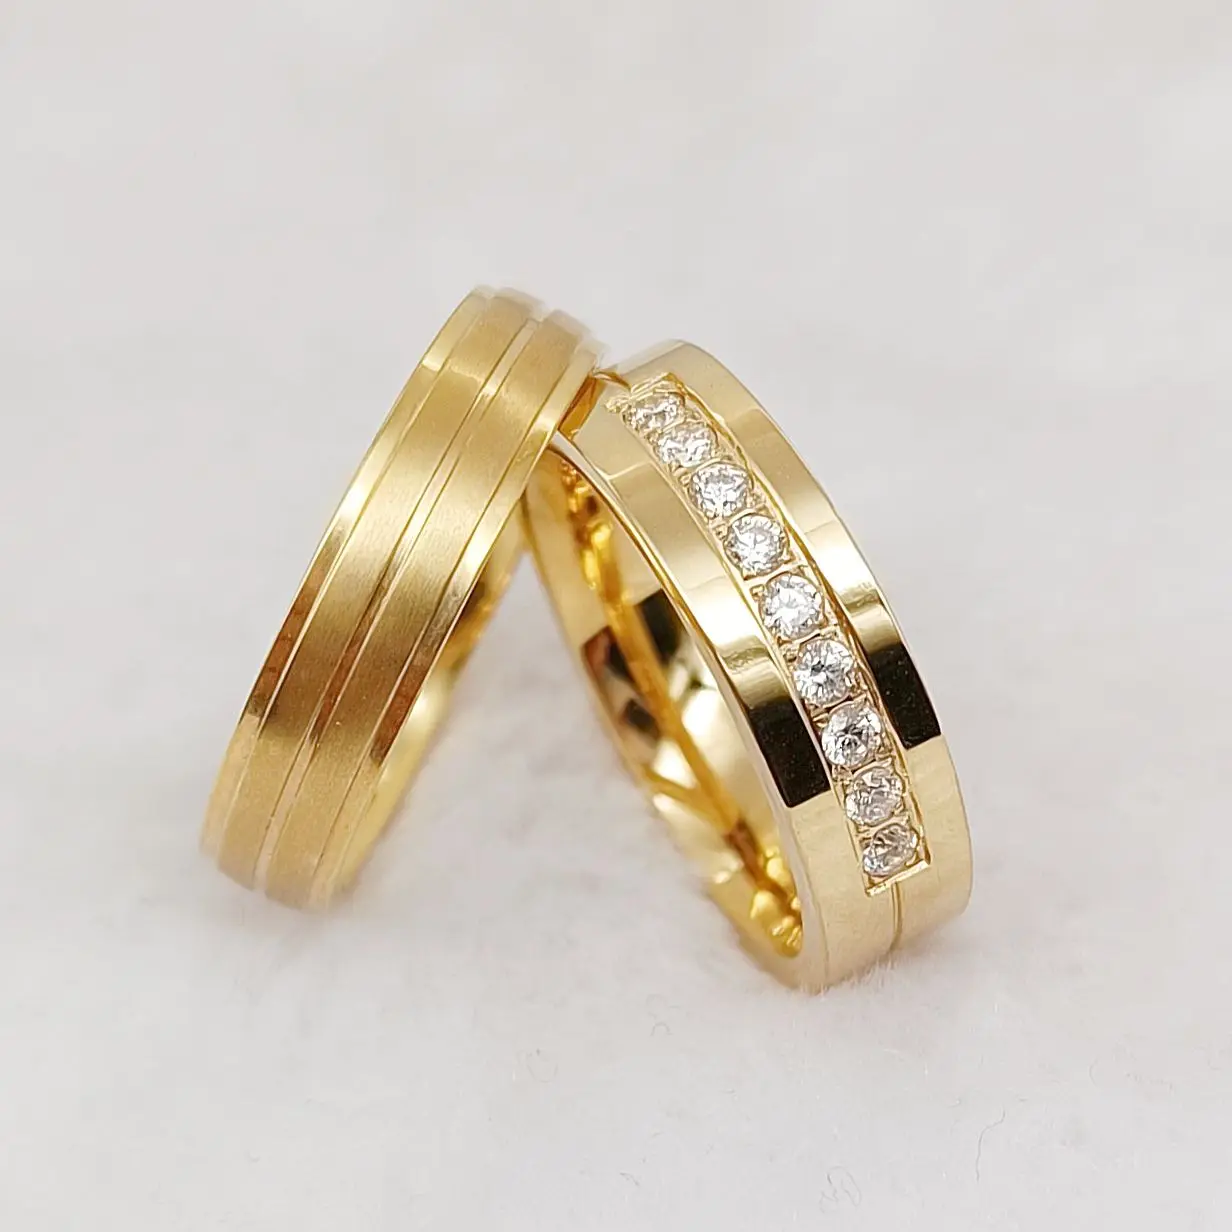 

High Quality Latest Lover's Alliance ladies fashion jewelry ring 24 carat Gold plated Promise wedding rings designs for couples